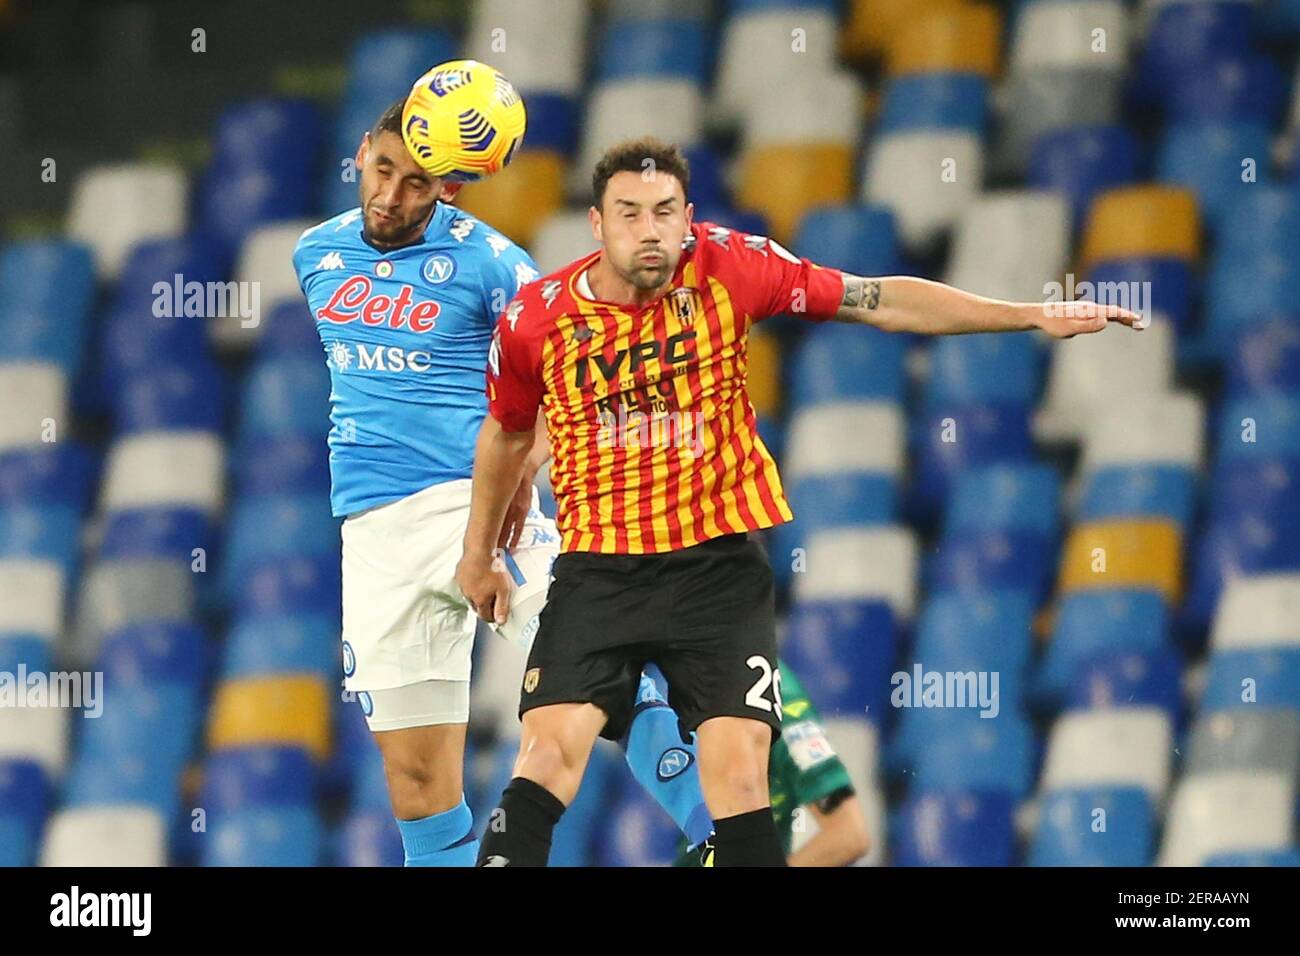 SSC Napoli's Algerian defender Faouzi Ghoulam  (L) challenges for the ball with Benevento's Moldavian defender Artur Ionita during the Serie A football match between SSC Napoli and Benevento at the Diego Armando Maradona Stadium, Naples, Italy, on 03 February  2021 Stock Photo